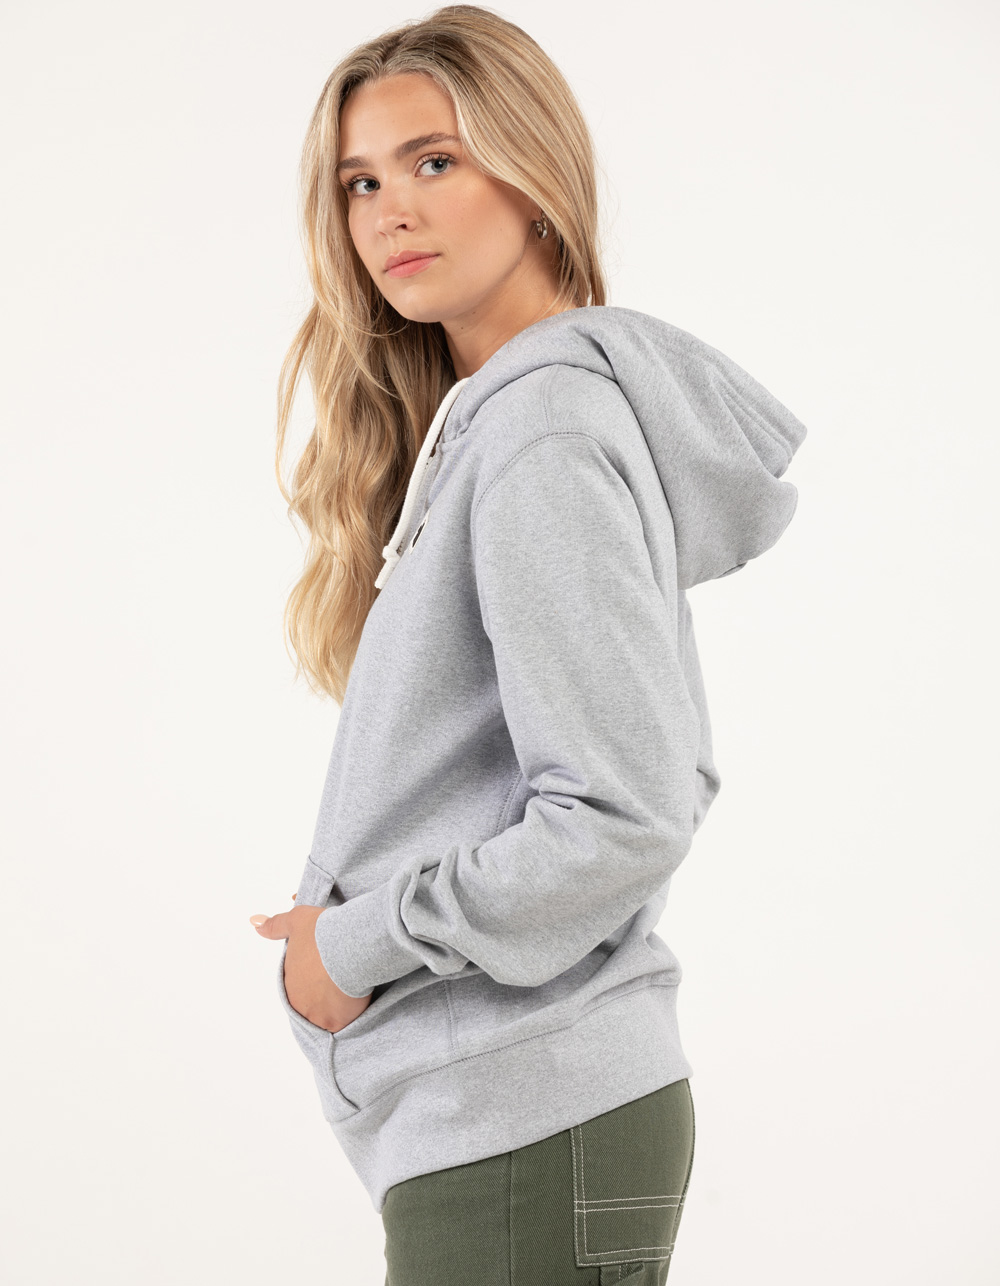 THE NORTH FACE Heritage Patch Womens Zip Up Hoodie - HEATHER GRAY | Tillys